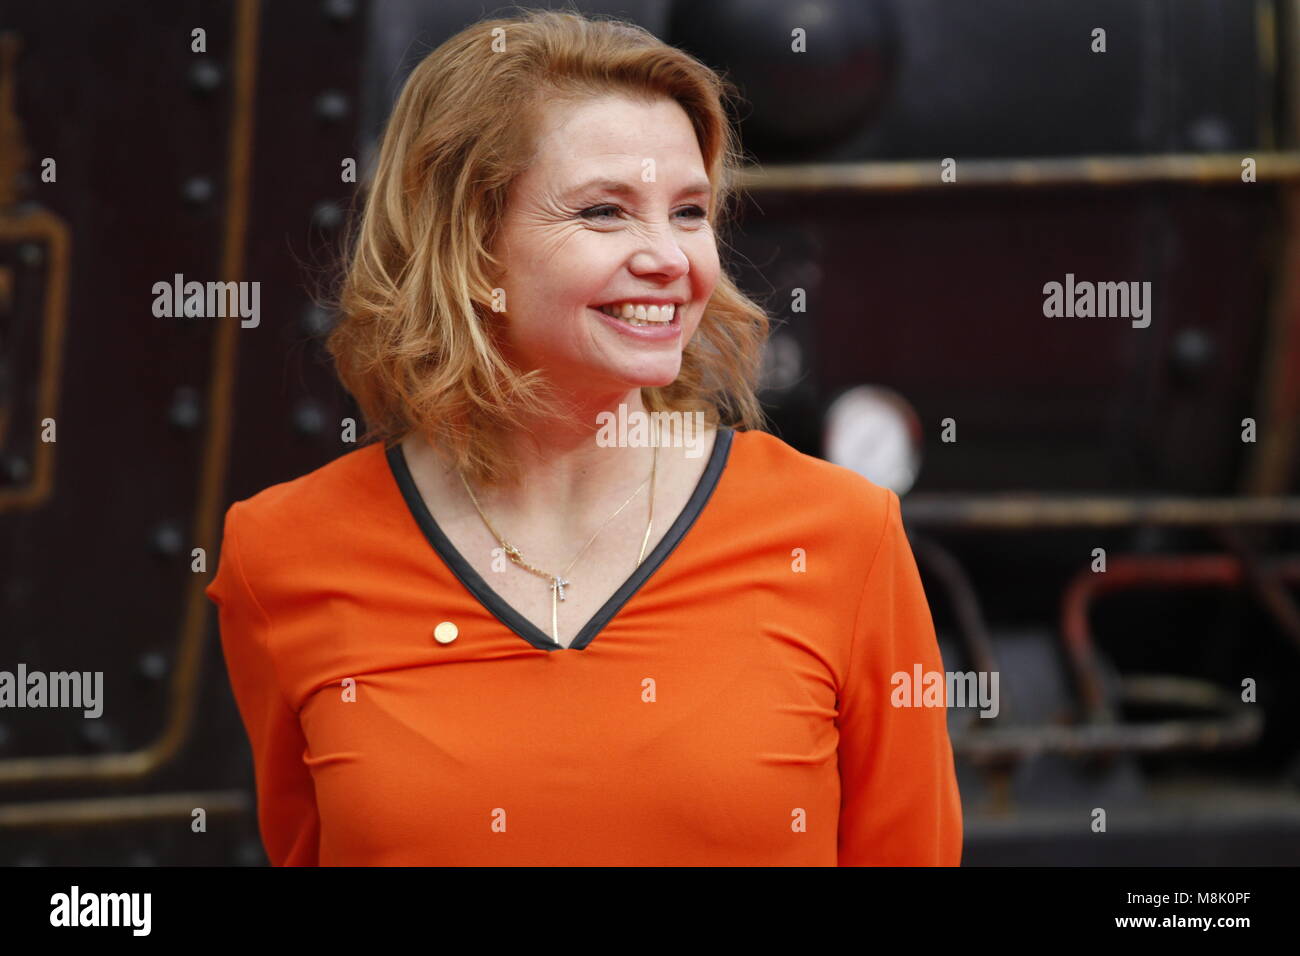 Berlin, Germany. 18th Mar, 2018. Berlin: The world premiere of 'Jim Knopf and Luke the locomotive driver' in front of the Sony Center on Potsdamer Platz. The photo shows the actor Annette Frier on the red carpet. Credit: Simone Kuhlmey/Pacific Press/Alamy Live News Stock Photo